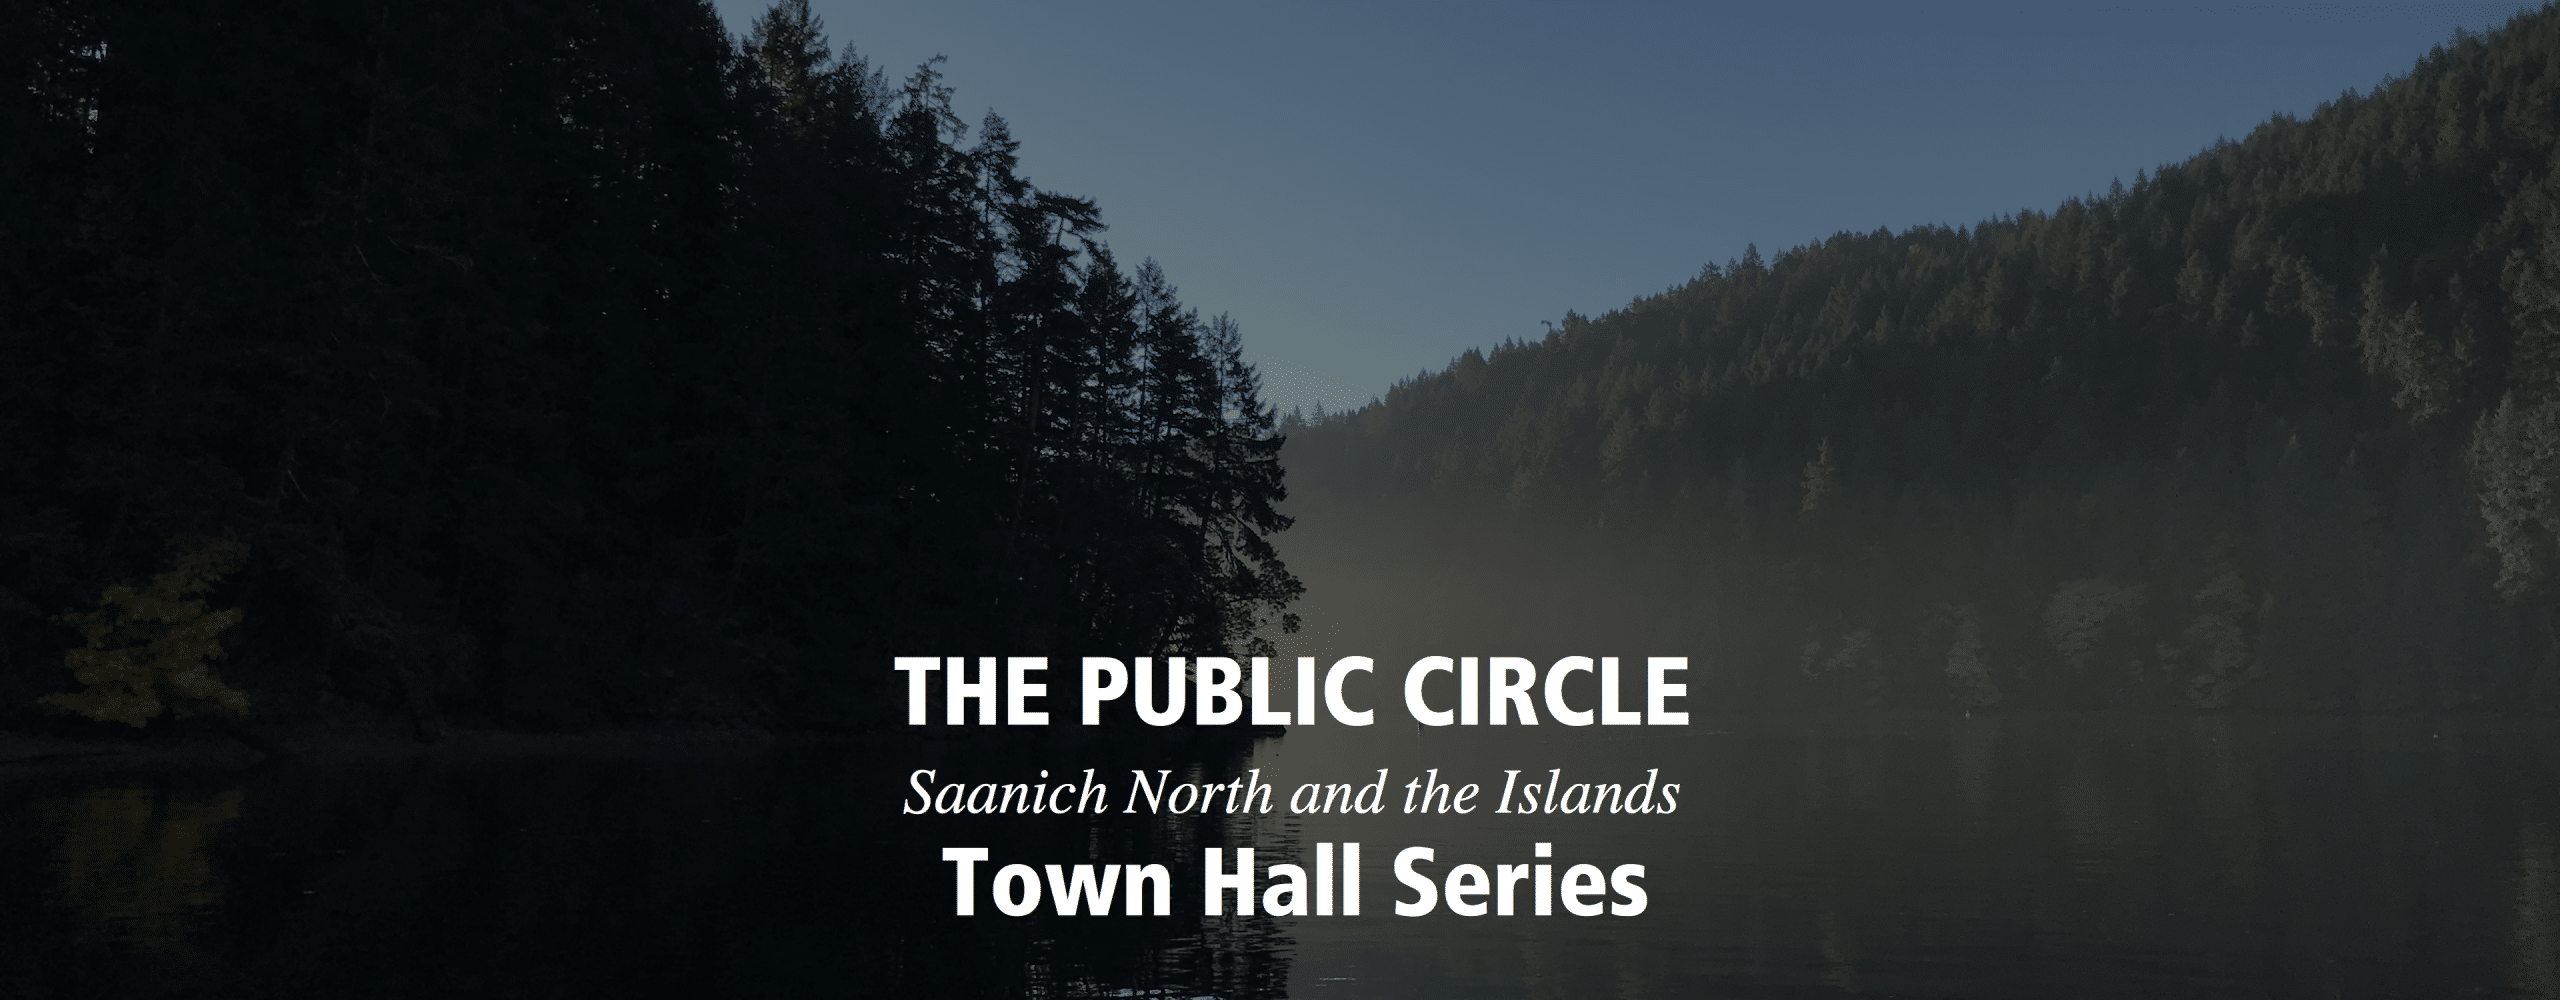 The Public Circle Town Hall Series